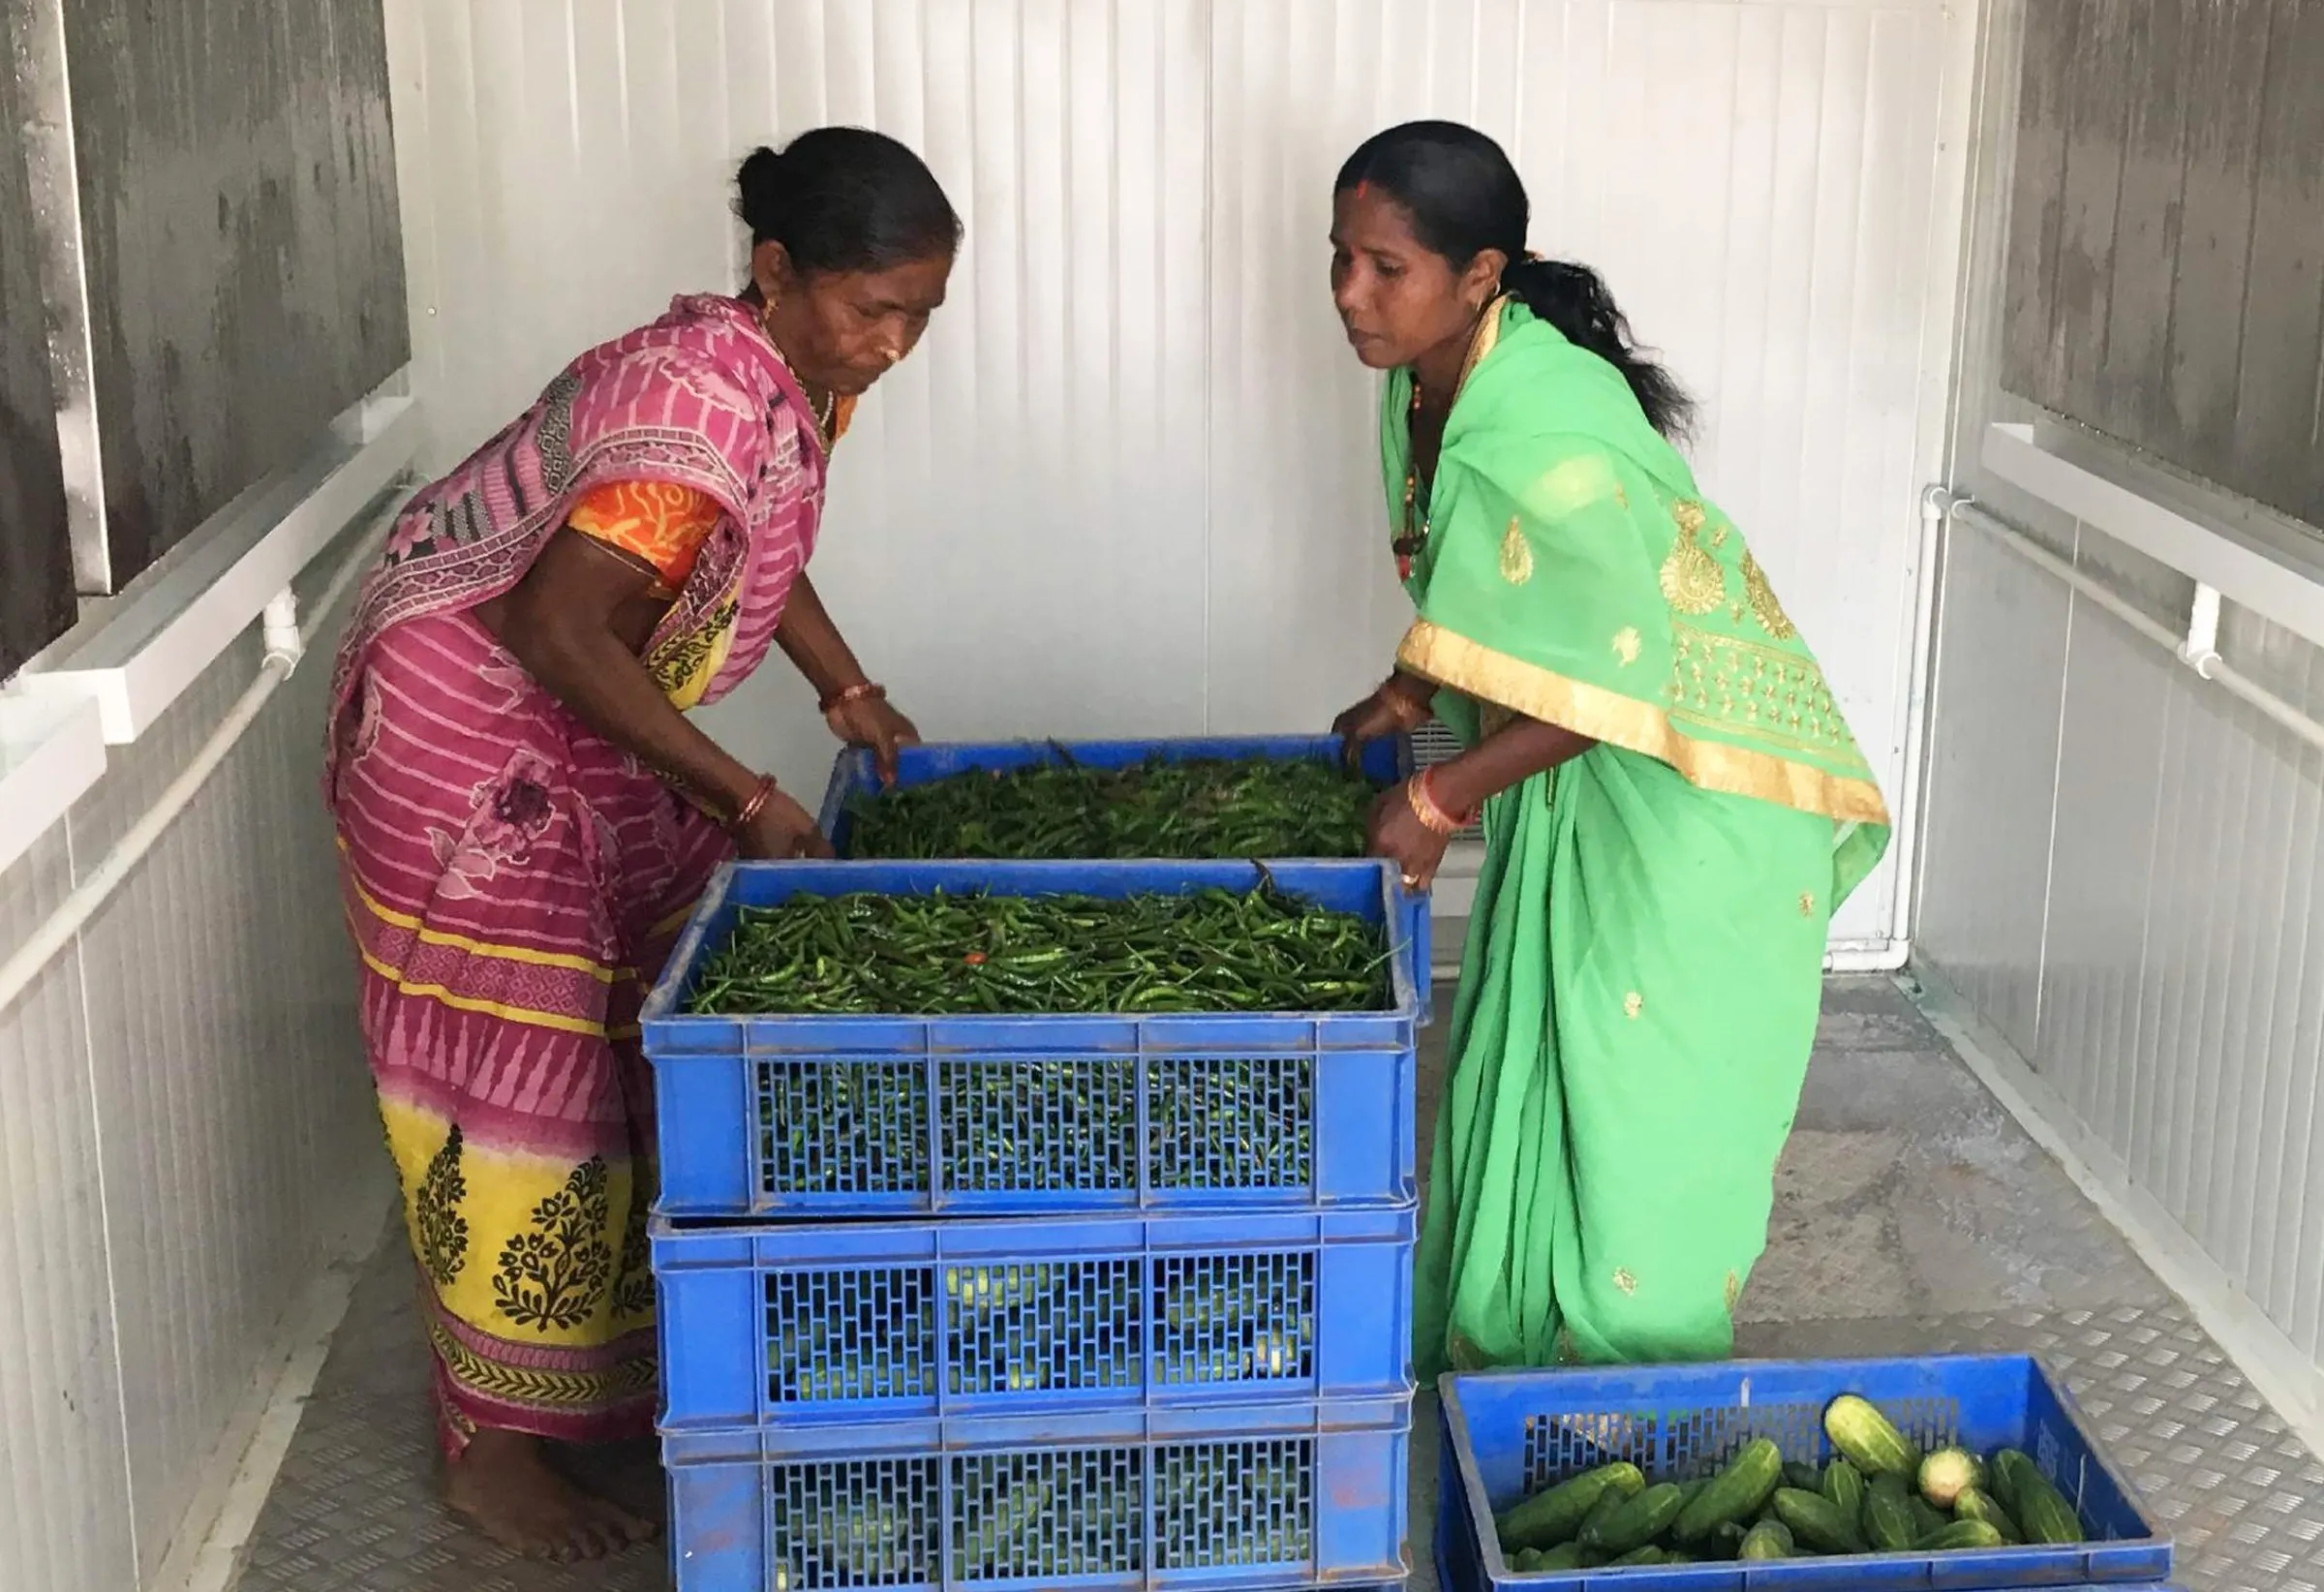 The women farmers arrange their vegetables and greens within a solar powered cold storage unit in Telengana, India, November 15, 2022